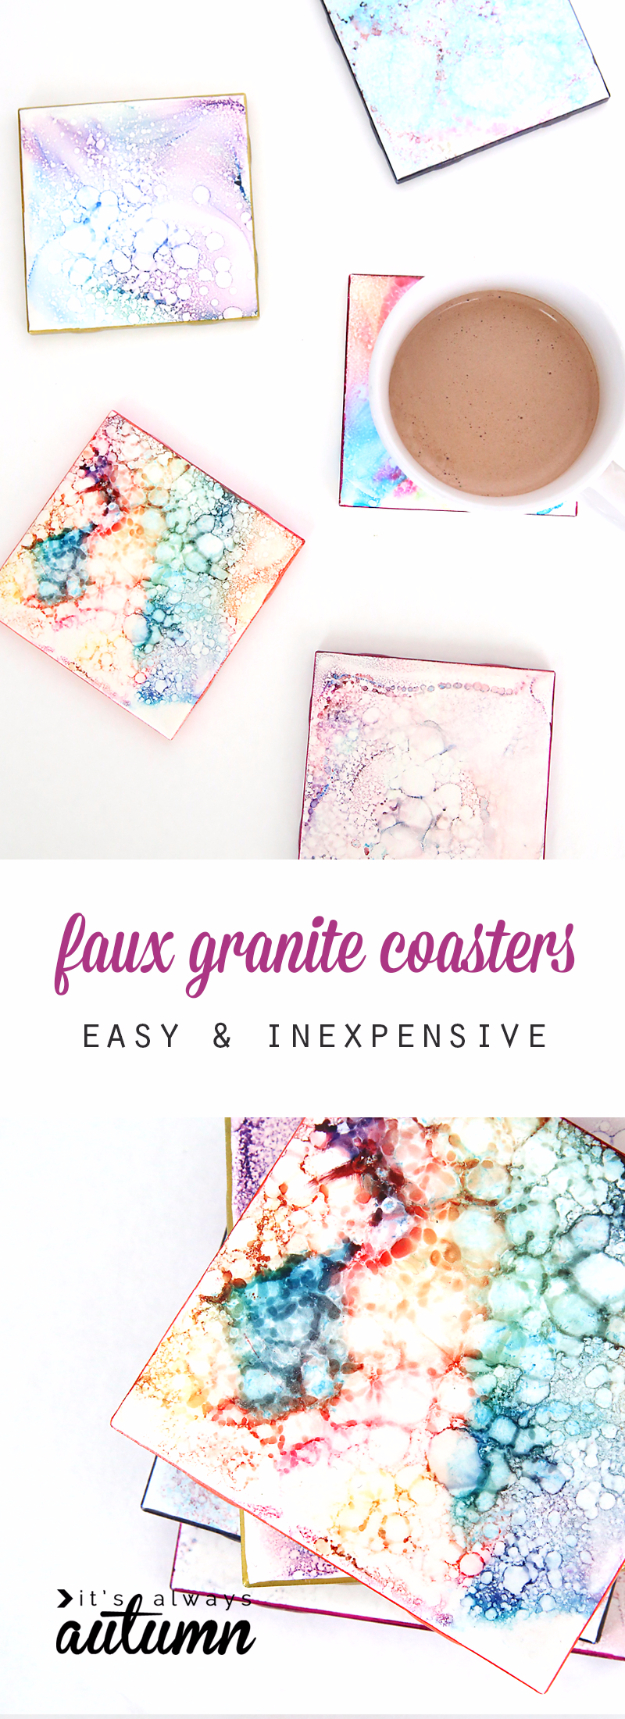 41 Easiest DIY Projects Ever - Faux Granite Coasters - Easy DIY Crafts and Projects - Simple Craft Ideas for Beginners, Cool Crafts To Make and Sell, Simple Home Decor, Fast DIY Gifts, Cheap and Quick Project Tutorials http://diyjoy.com/easy-diy-projects